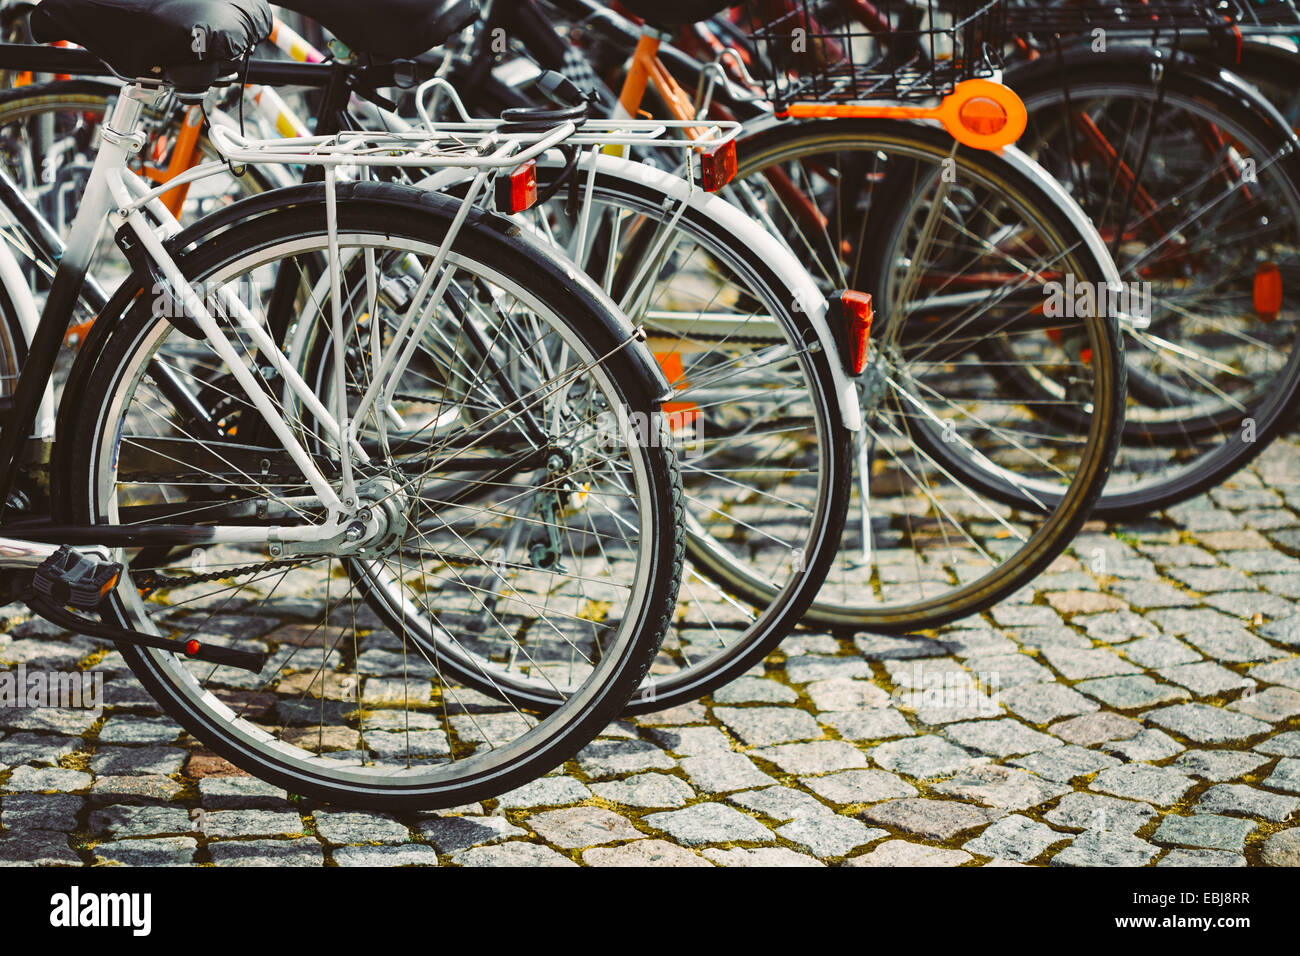 Parked Bicycles On Sidewalk. Bike Bicycle Parking In Big City. Toned Instant Photo Stock Photo